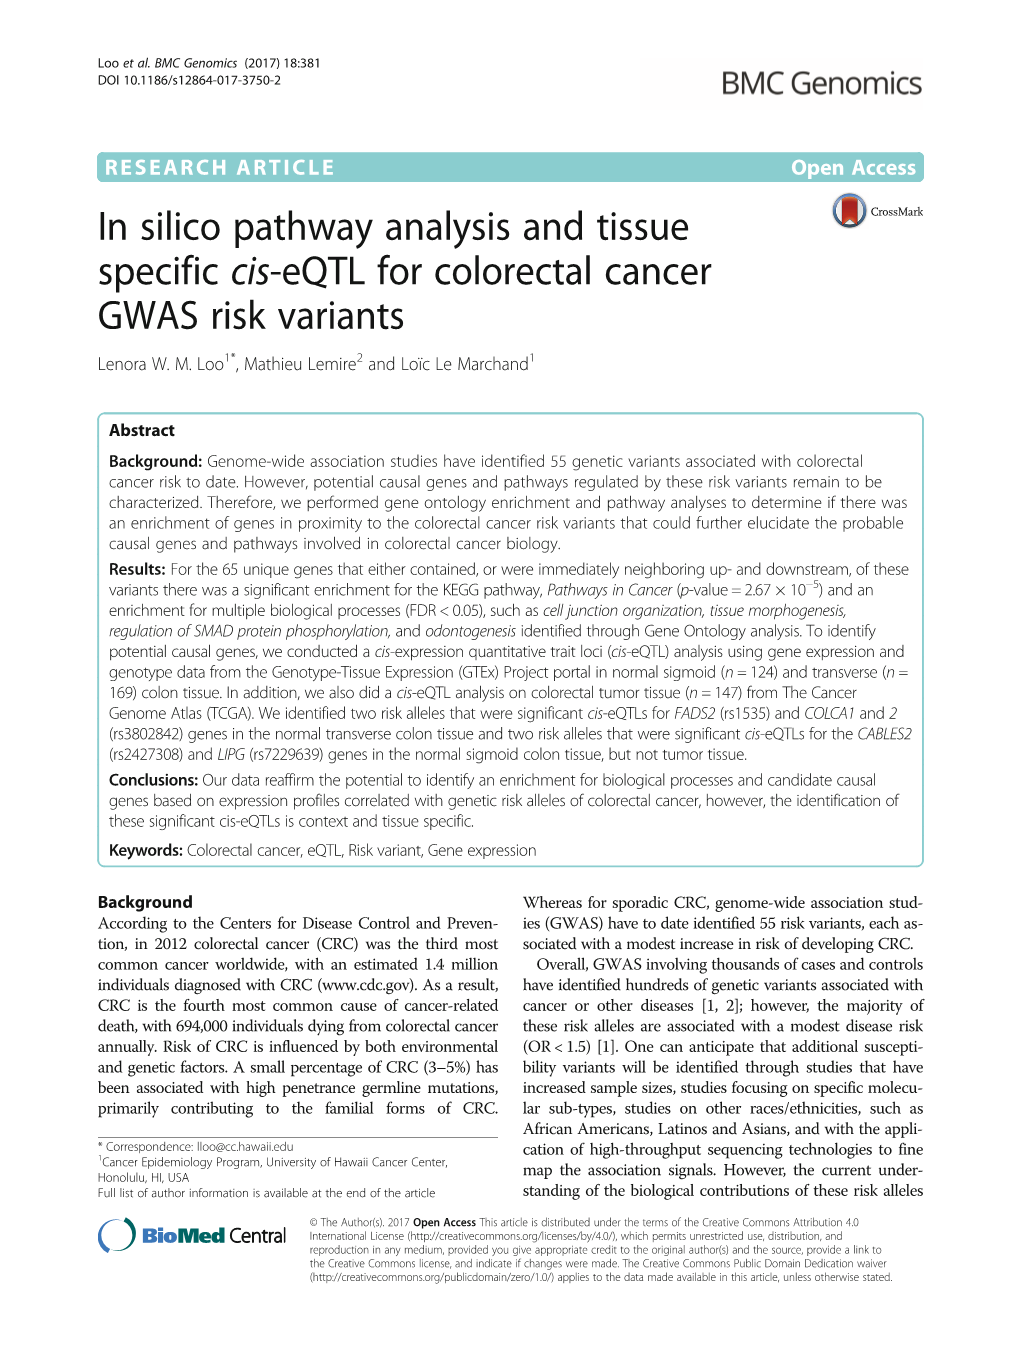 In Silico Pathway Analysis and Tissue Specific Cis-Eqtl for Colorectal Cancer GWAS Risk Variants Lenora W